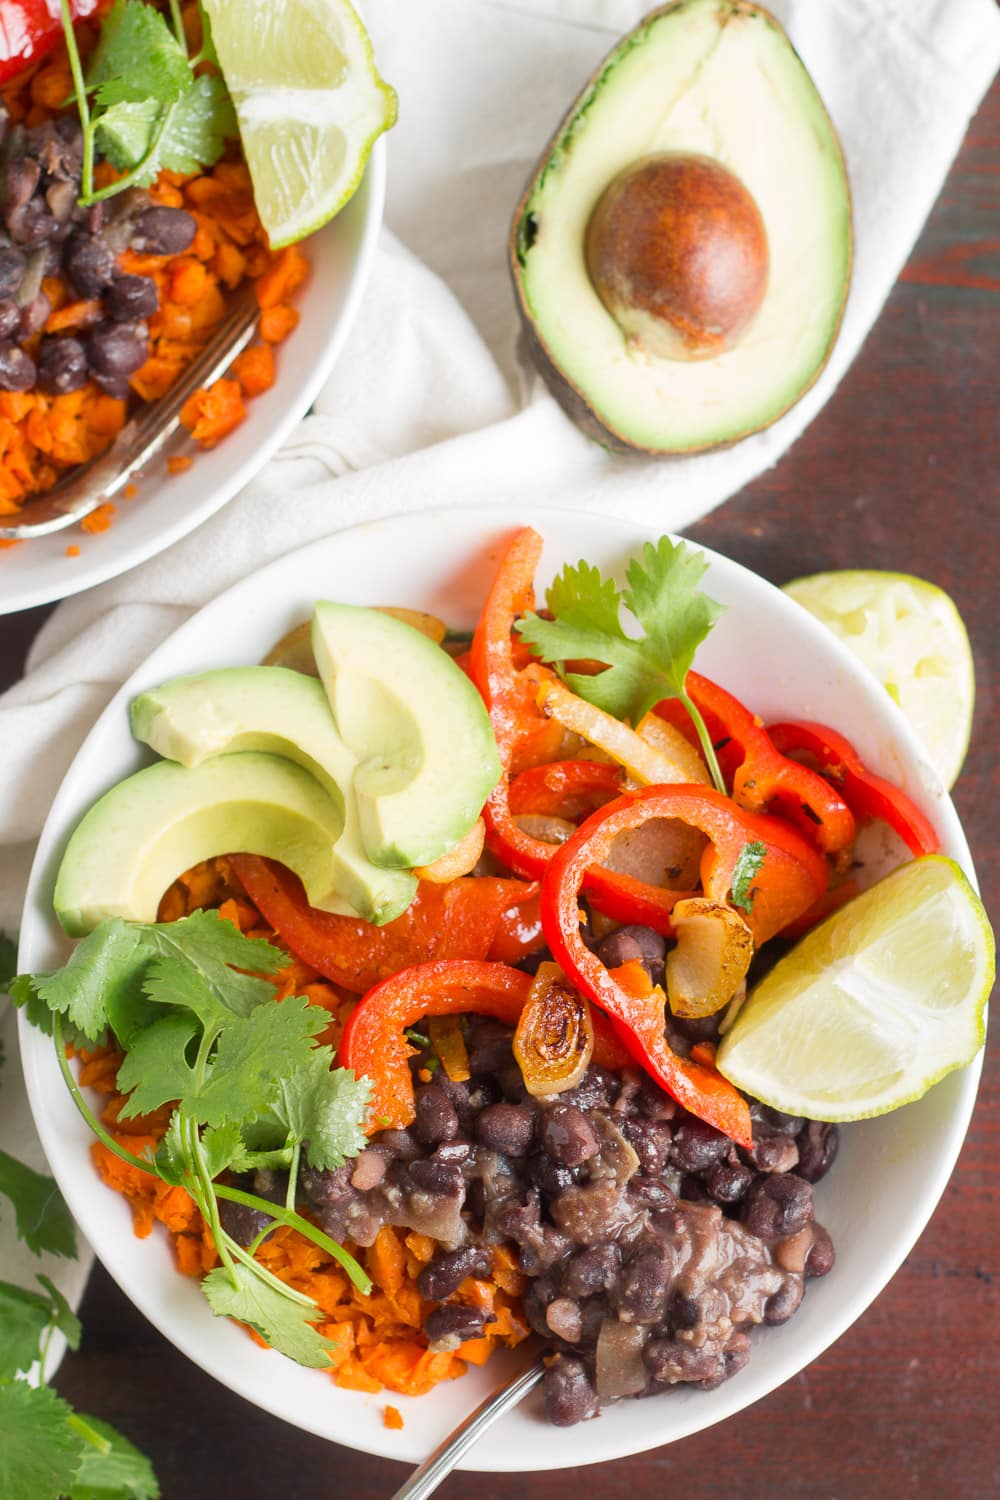 Lightened-Up Black Bean Burrito Bowls with Carrot Rice